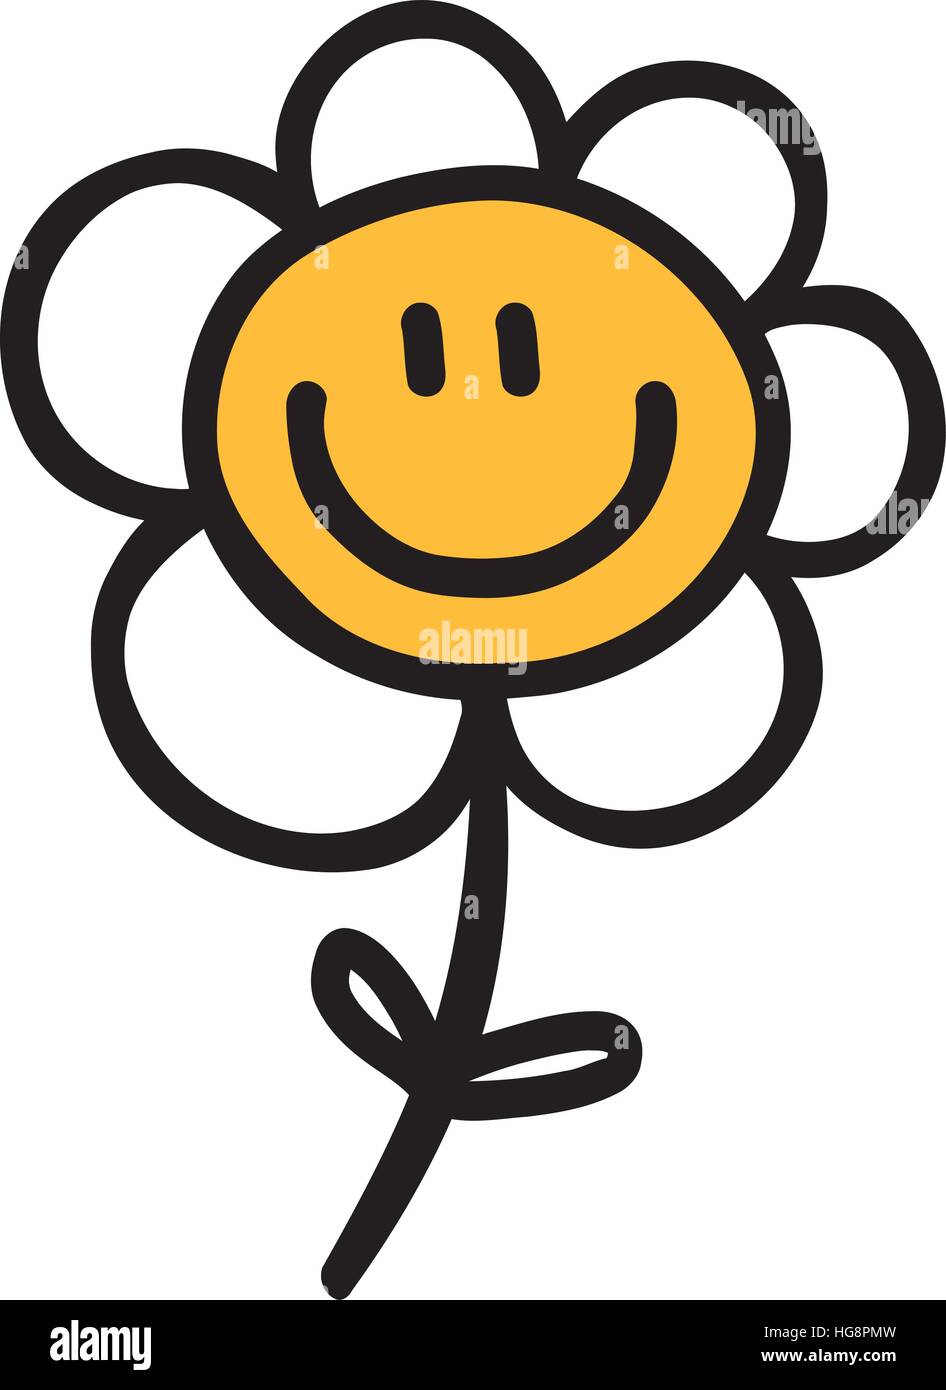 Flower with a smile smiley face daisy Royalty Free Vector